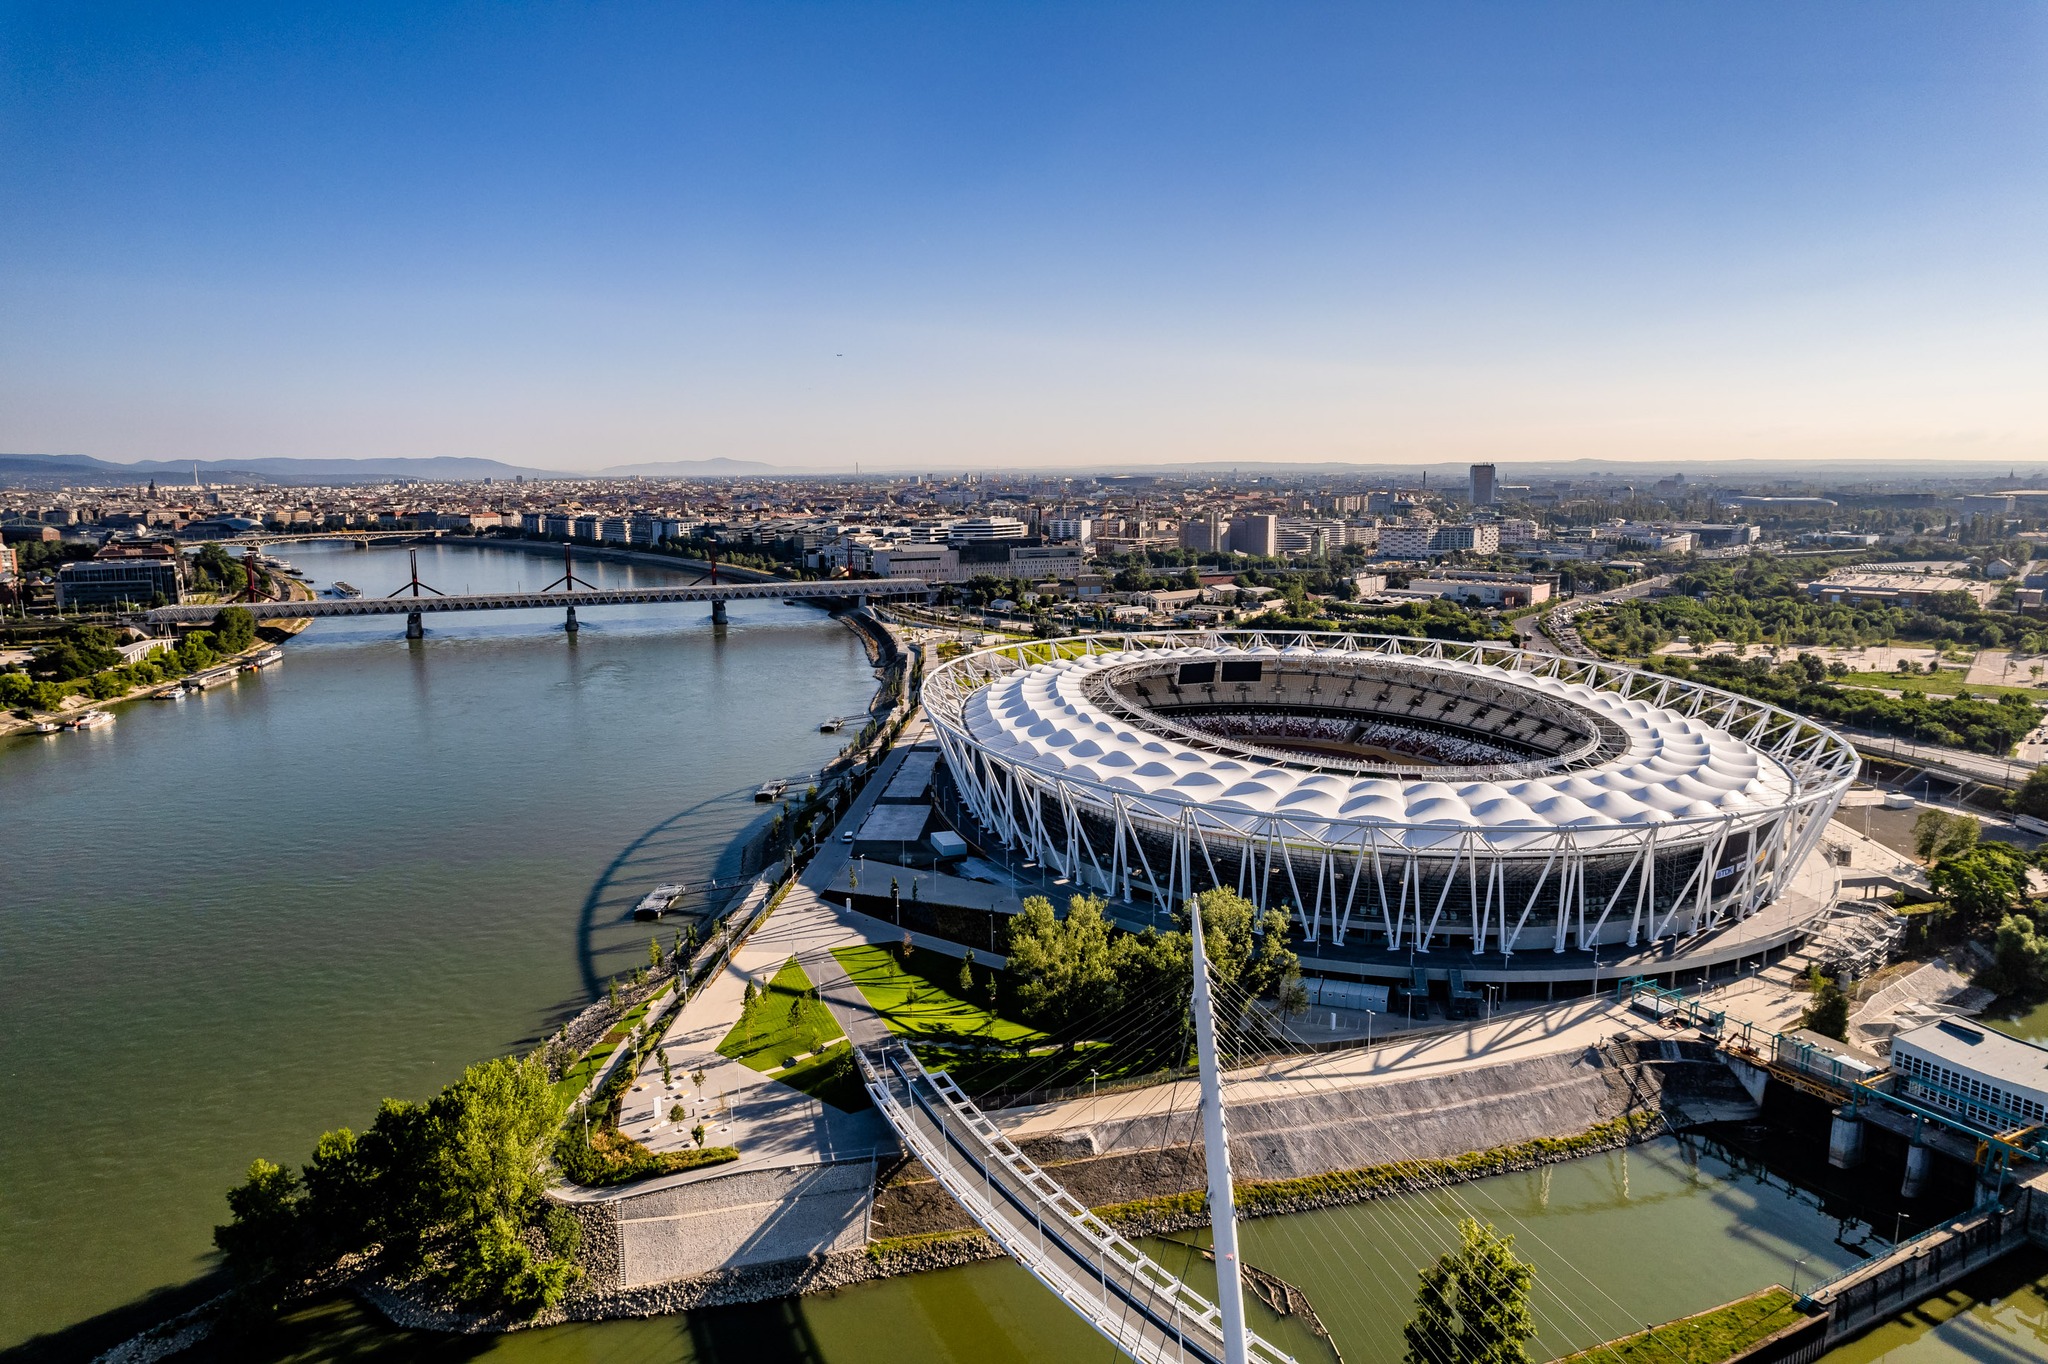 Budapest to Host First Ever World Athletics Ultimate Championship in 2026